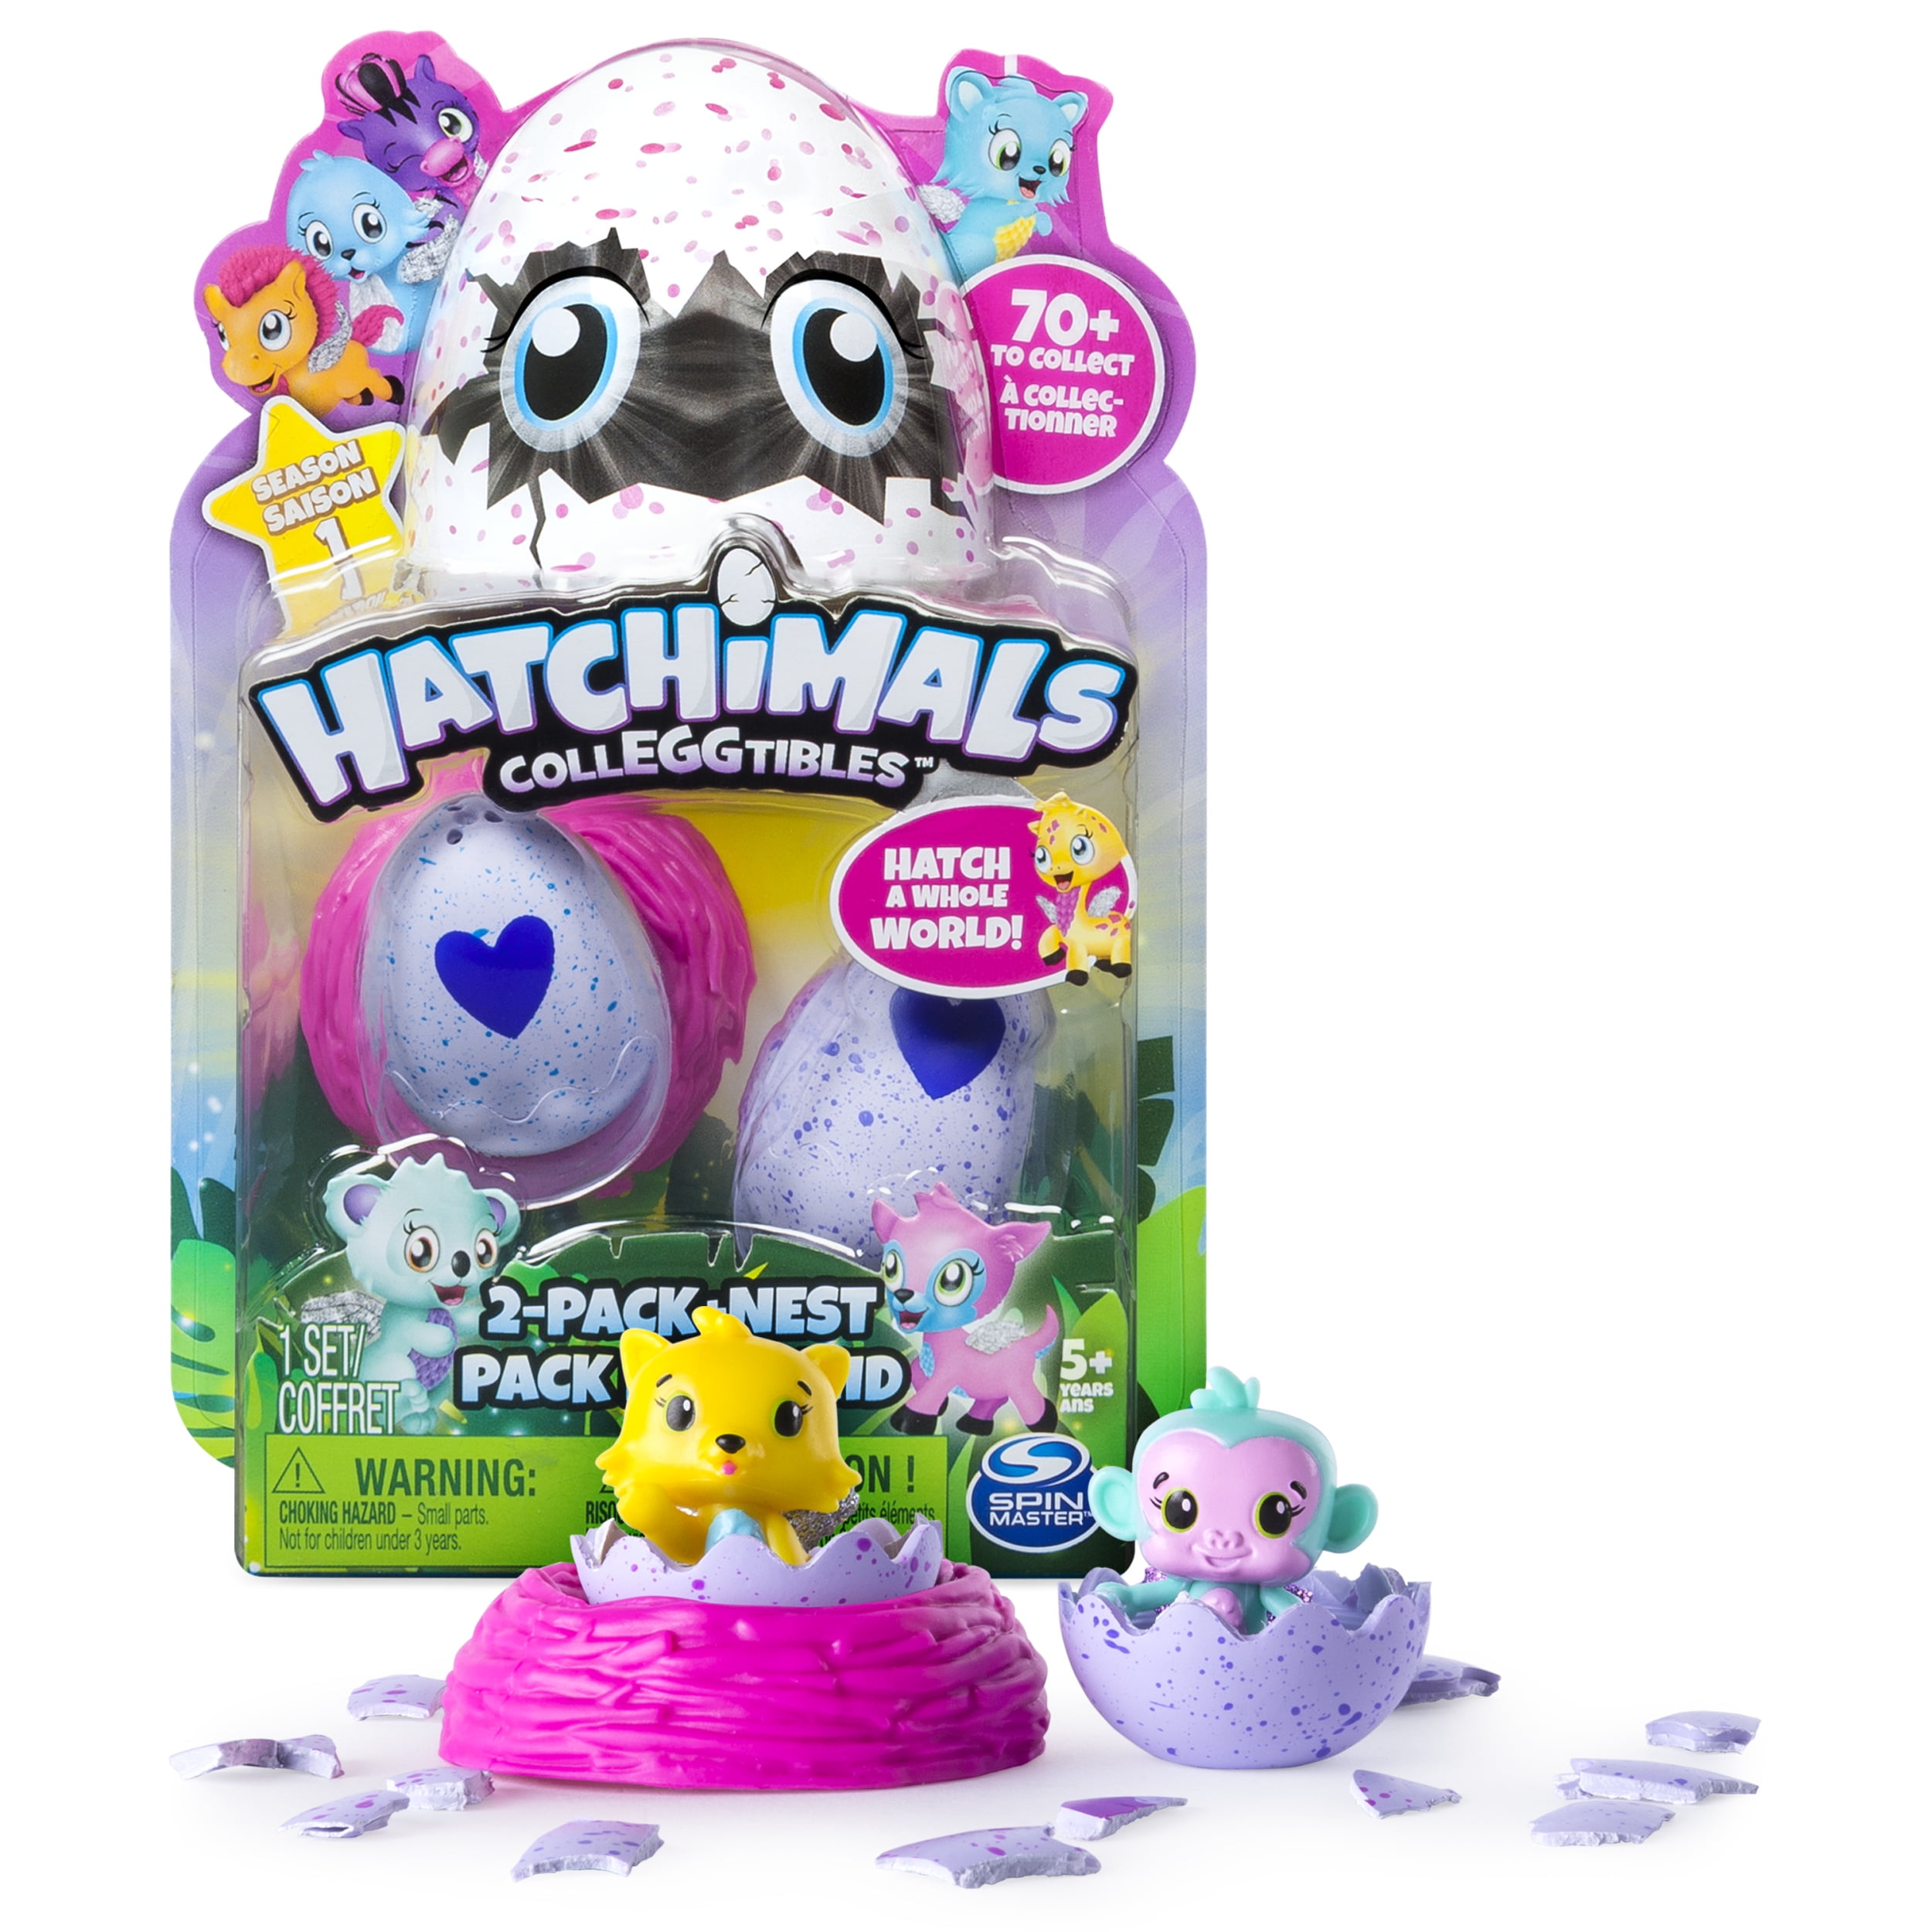 Details about   Hatchimals Colleggtibles 4 Pack Bonus Blue & 2 Pack Nest Mystery Mini Brand New 